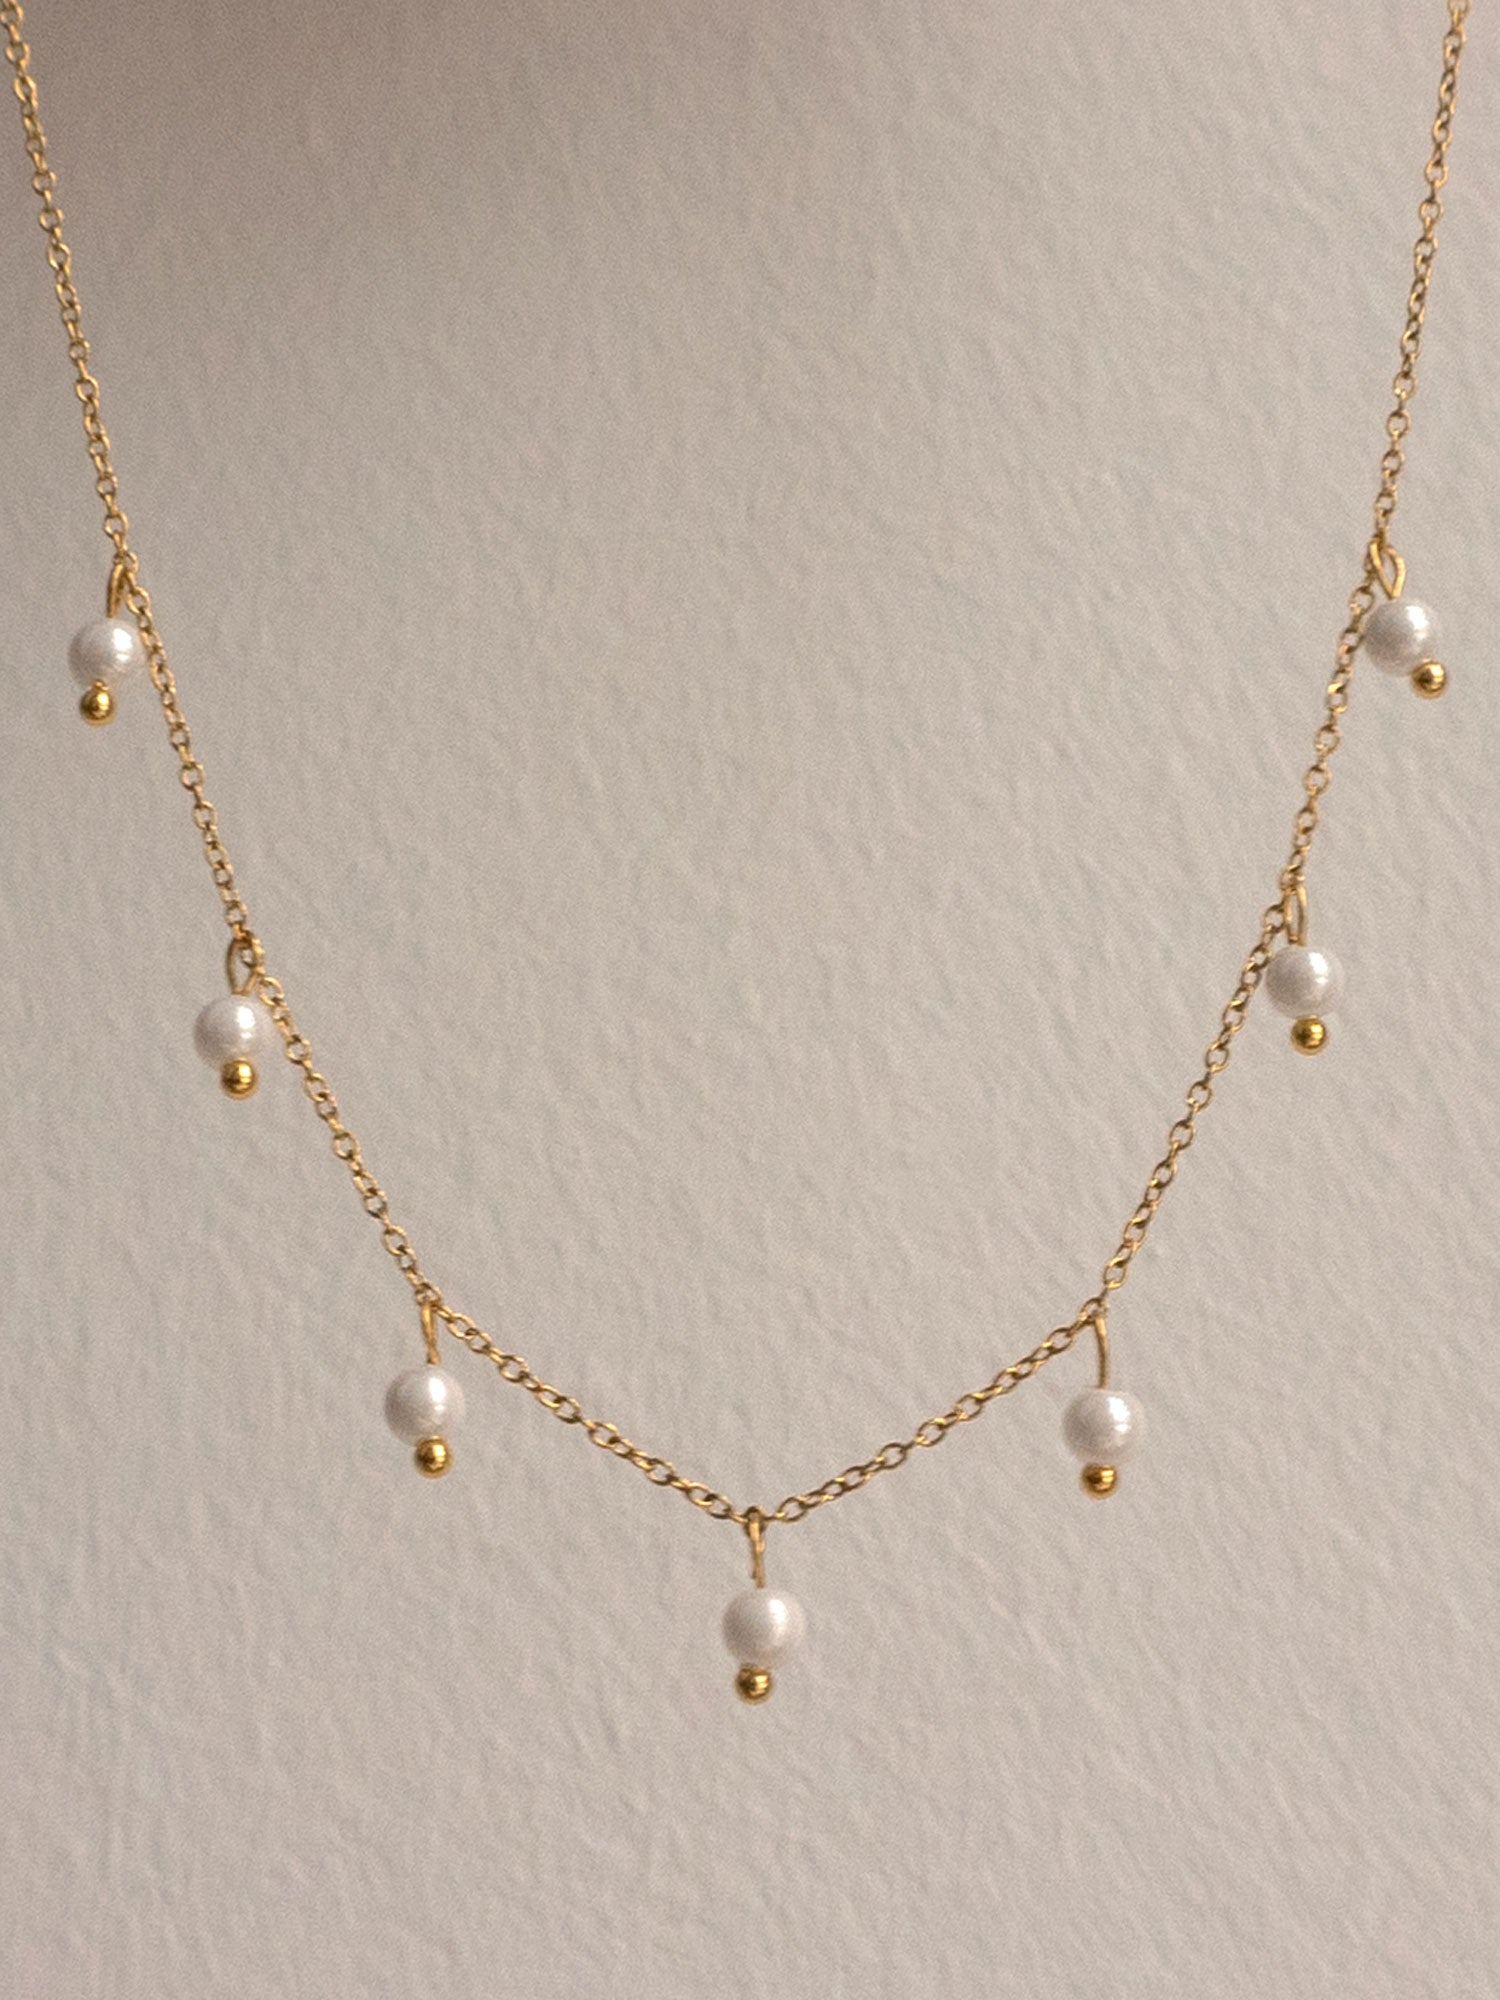 Petite Dangling Pearls Necklace